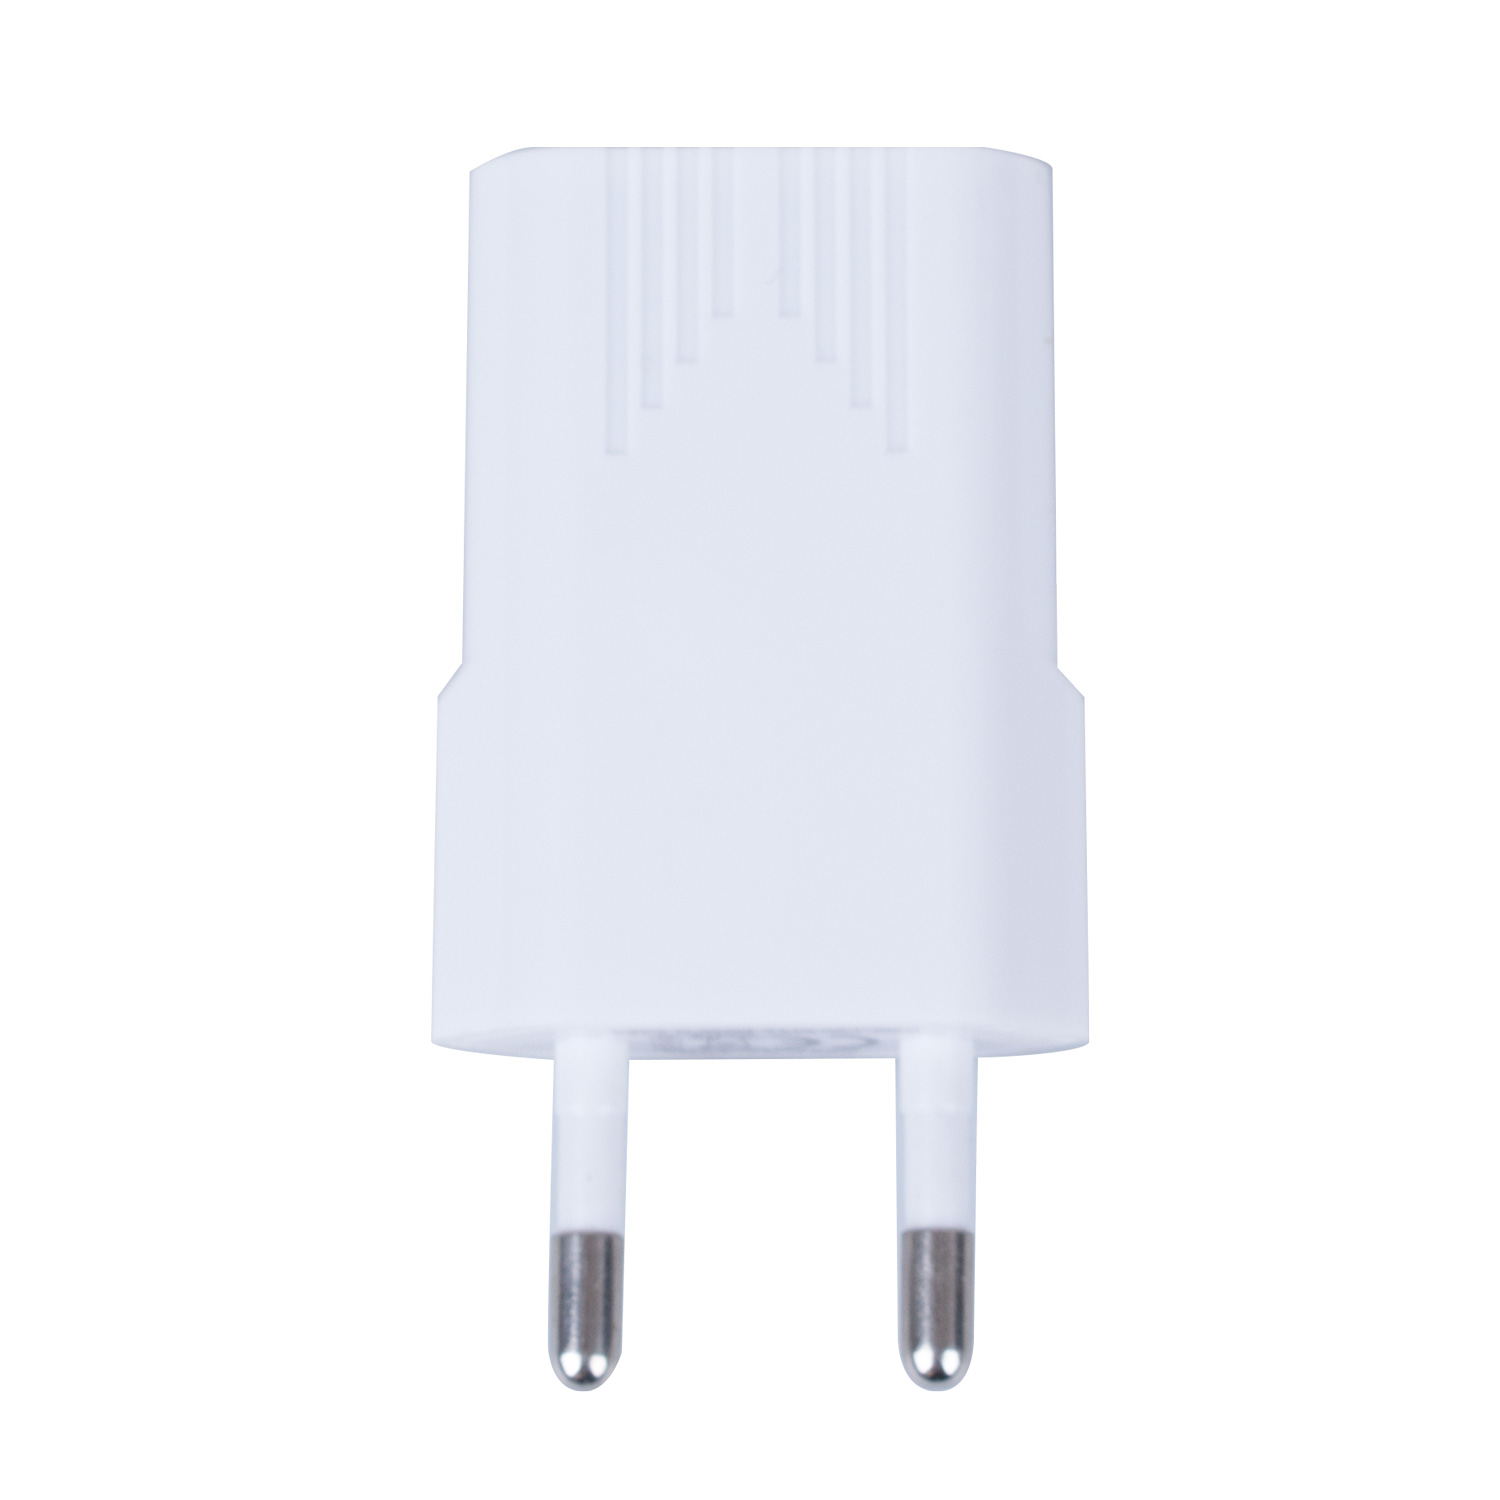 Embout Secteur USB + Câble pour iPhone 2,4A Blanc - Freaks and Geeks